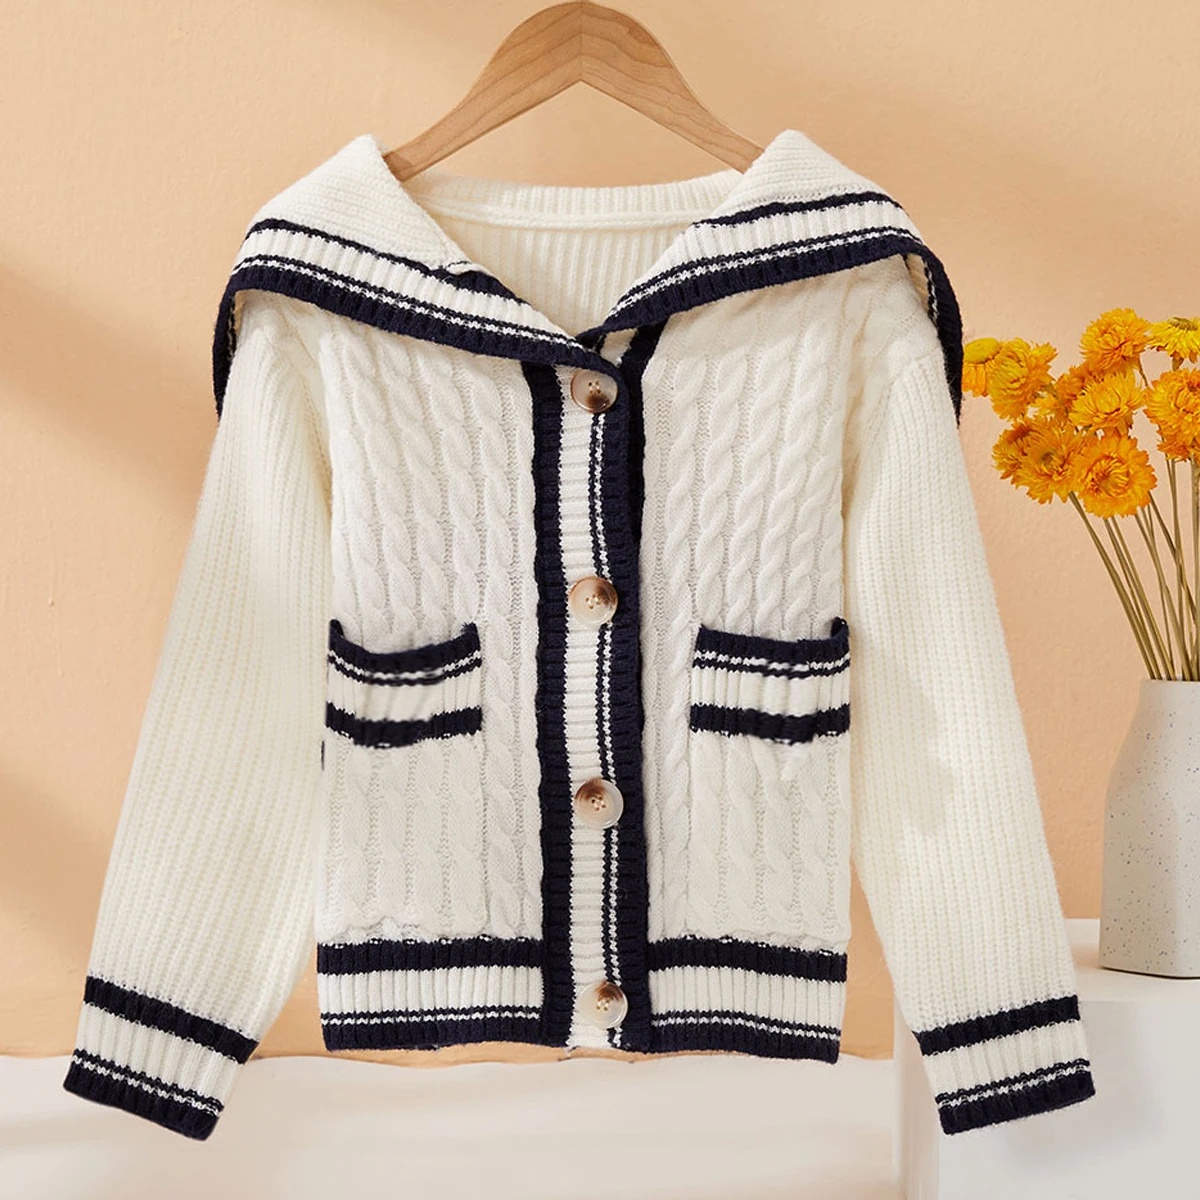 

Baby Girls Sweaters for Kids Cardigans Clothes for Teenagers School Preppy Knitted Coat Autumn Winter Children Jackets 4-12Years